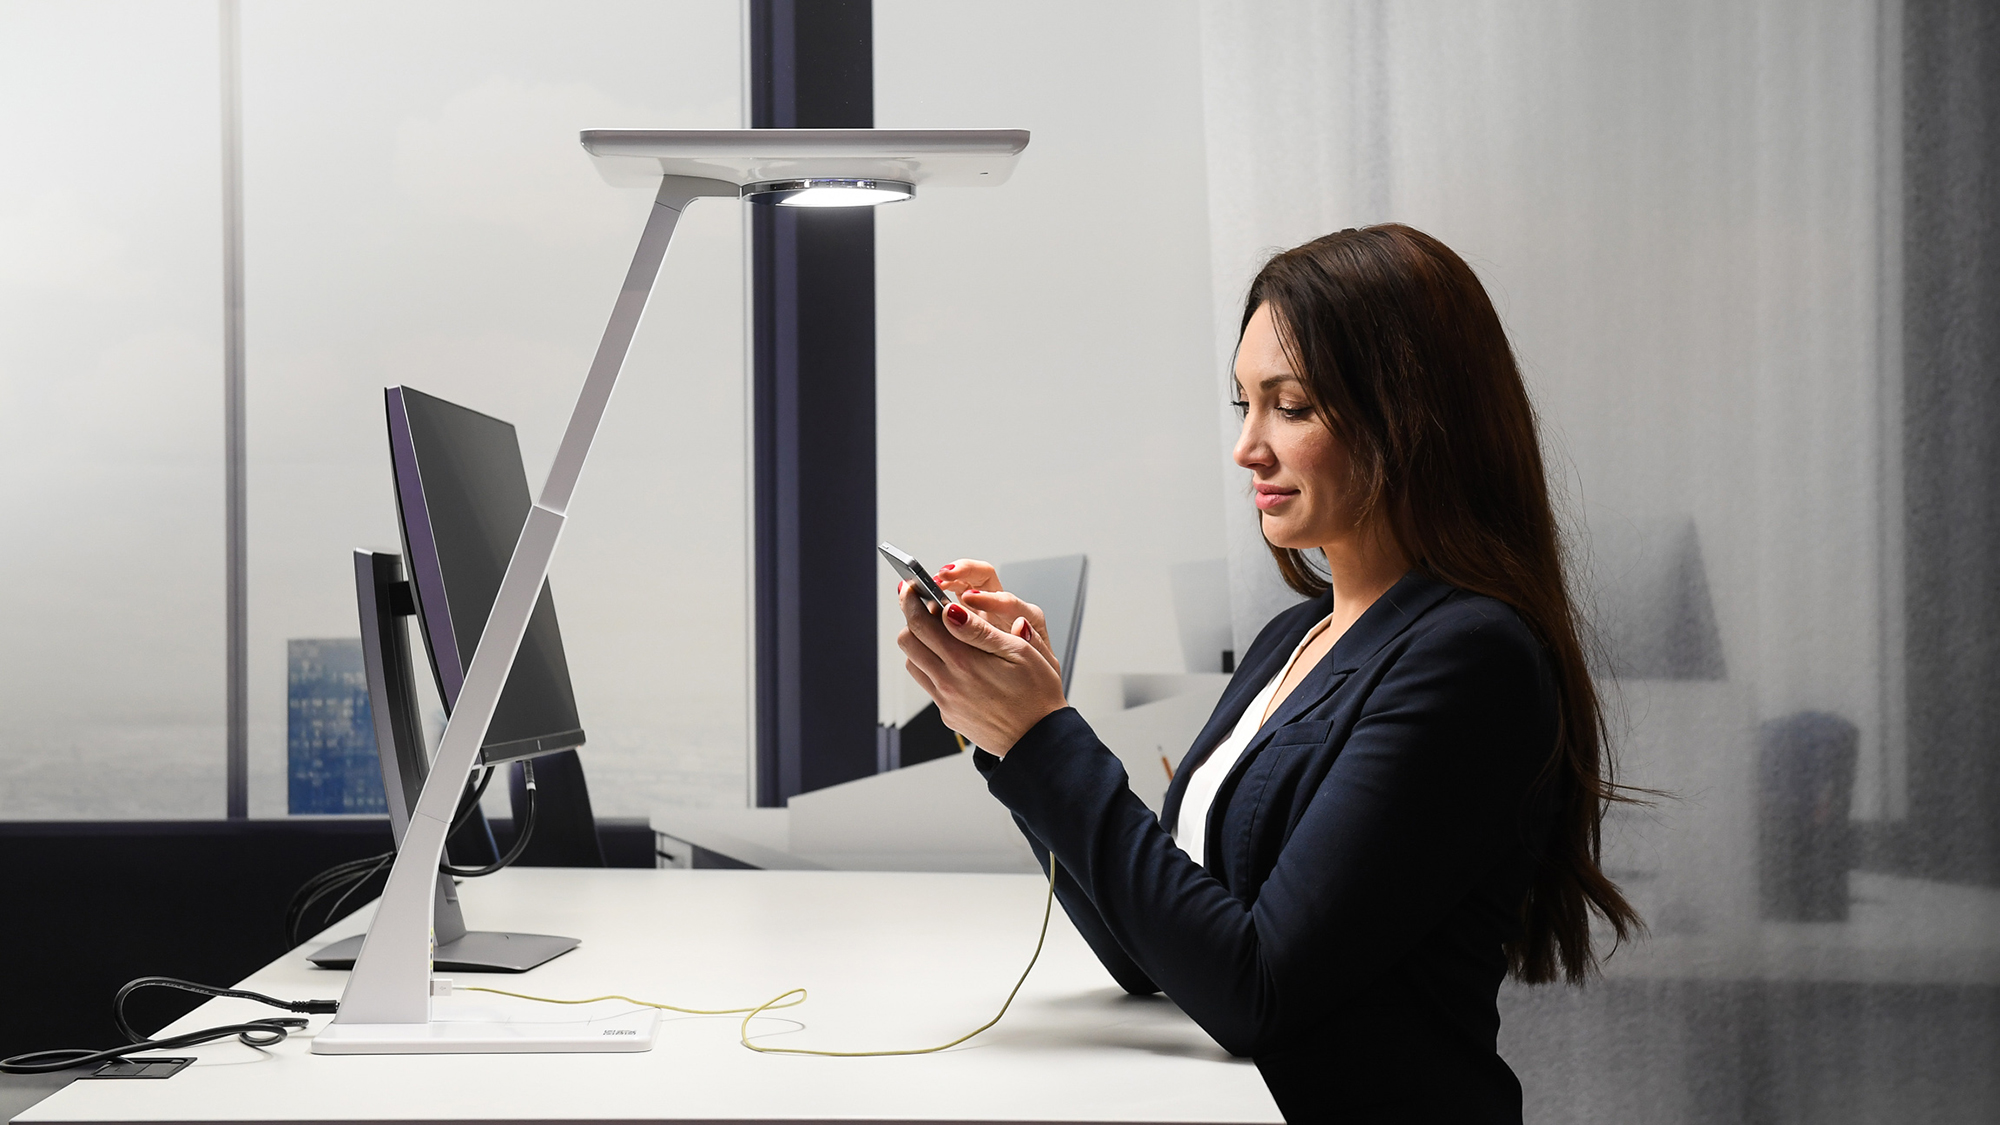 Woman with smartphone in front of a table lamp